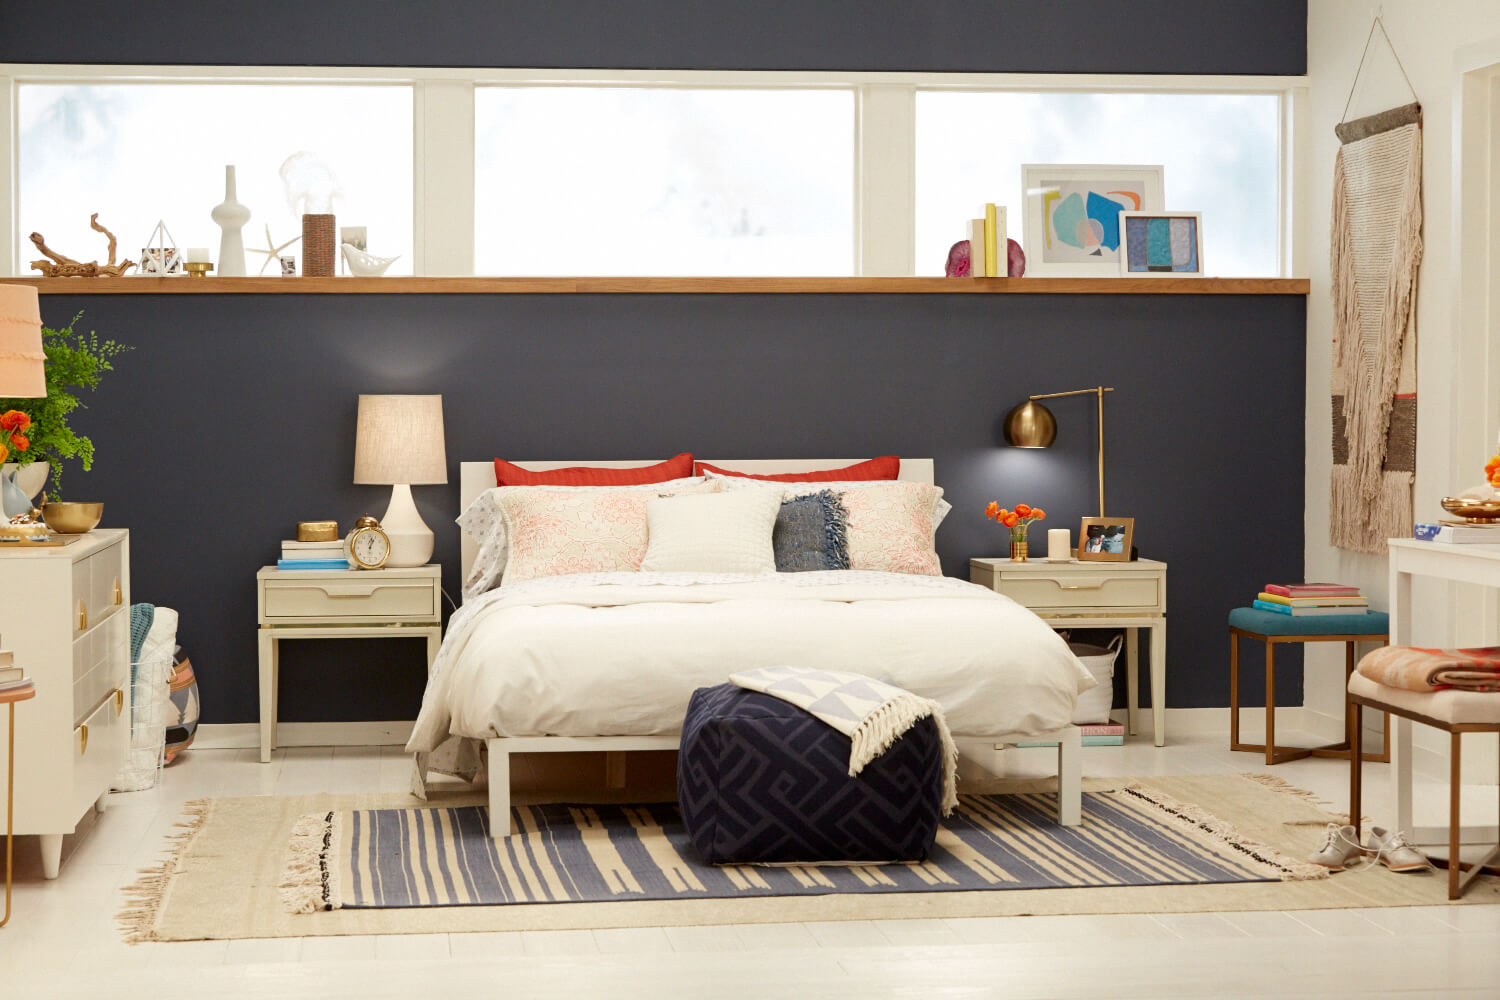 target chapter navy blue accent wall bedroom makeover emily henderson bedding midcentury modern table outdoor barbecue wood and metal dining patio chair cushions grill grates